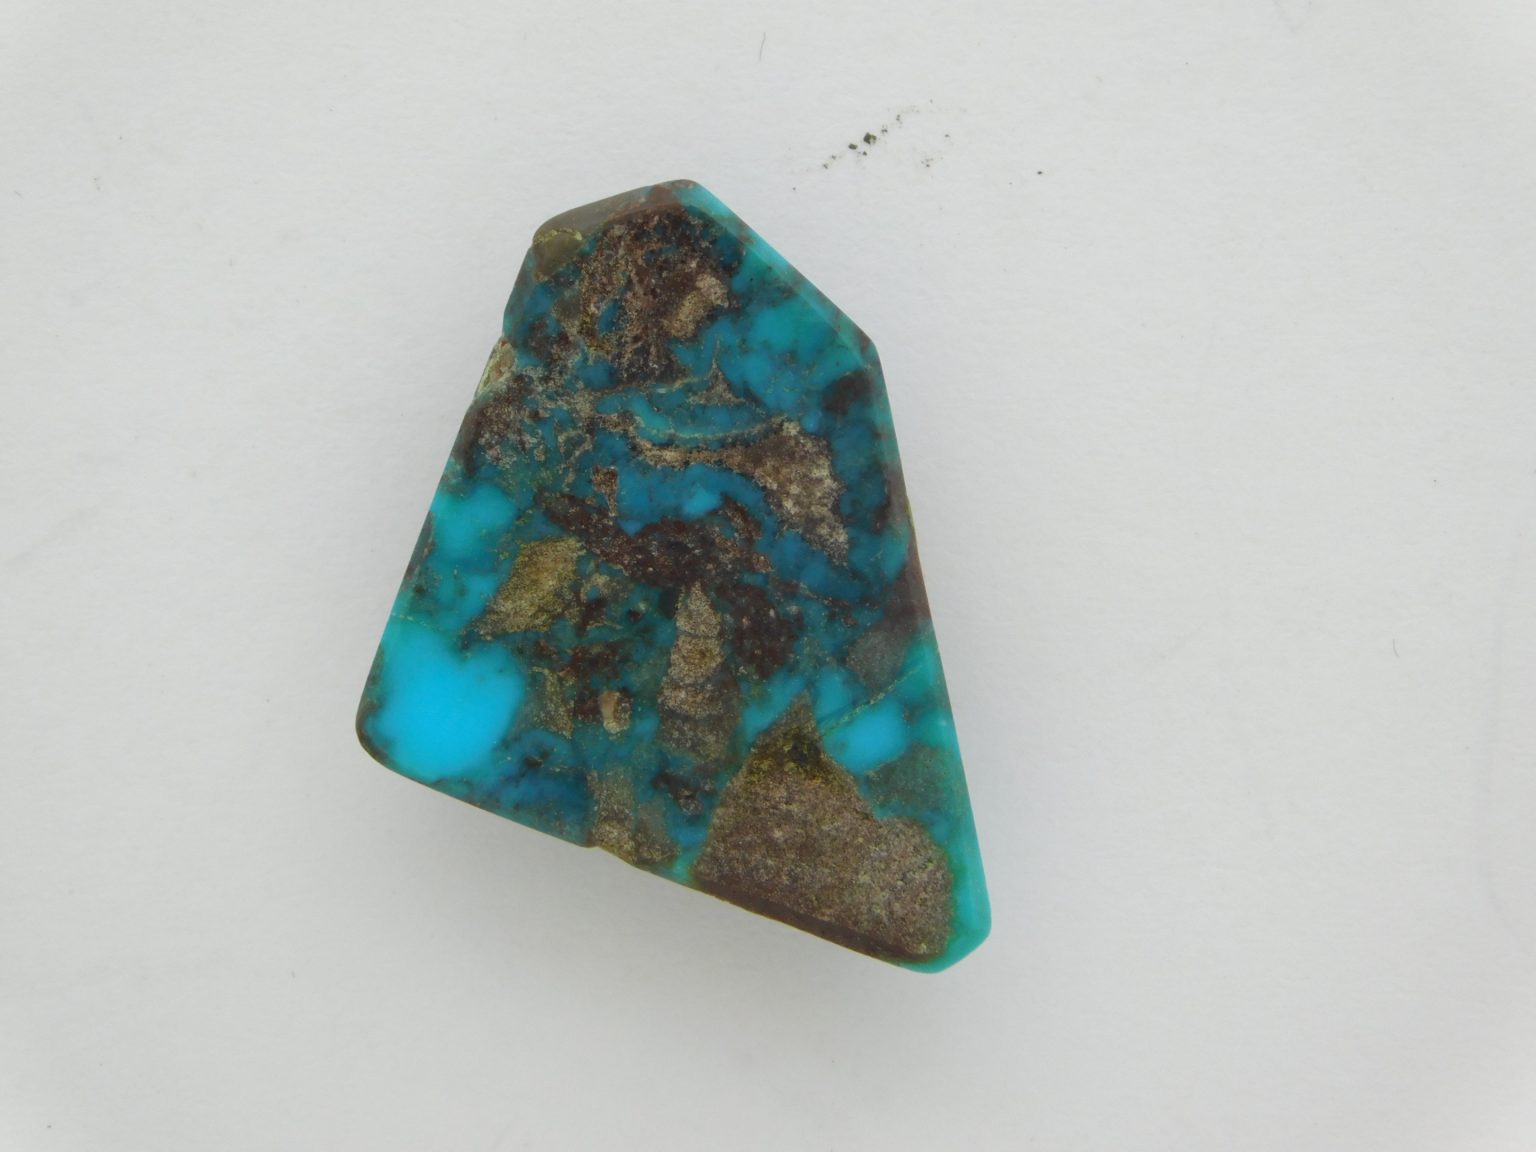 Rear view of Bisbee Turquoise Cabochon 16 carats